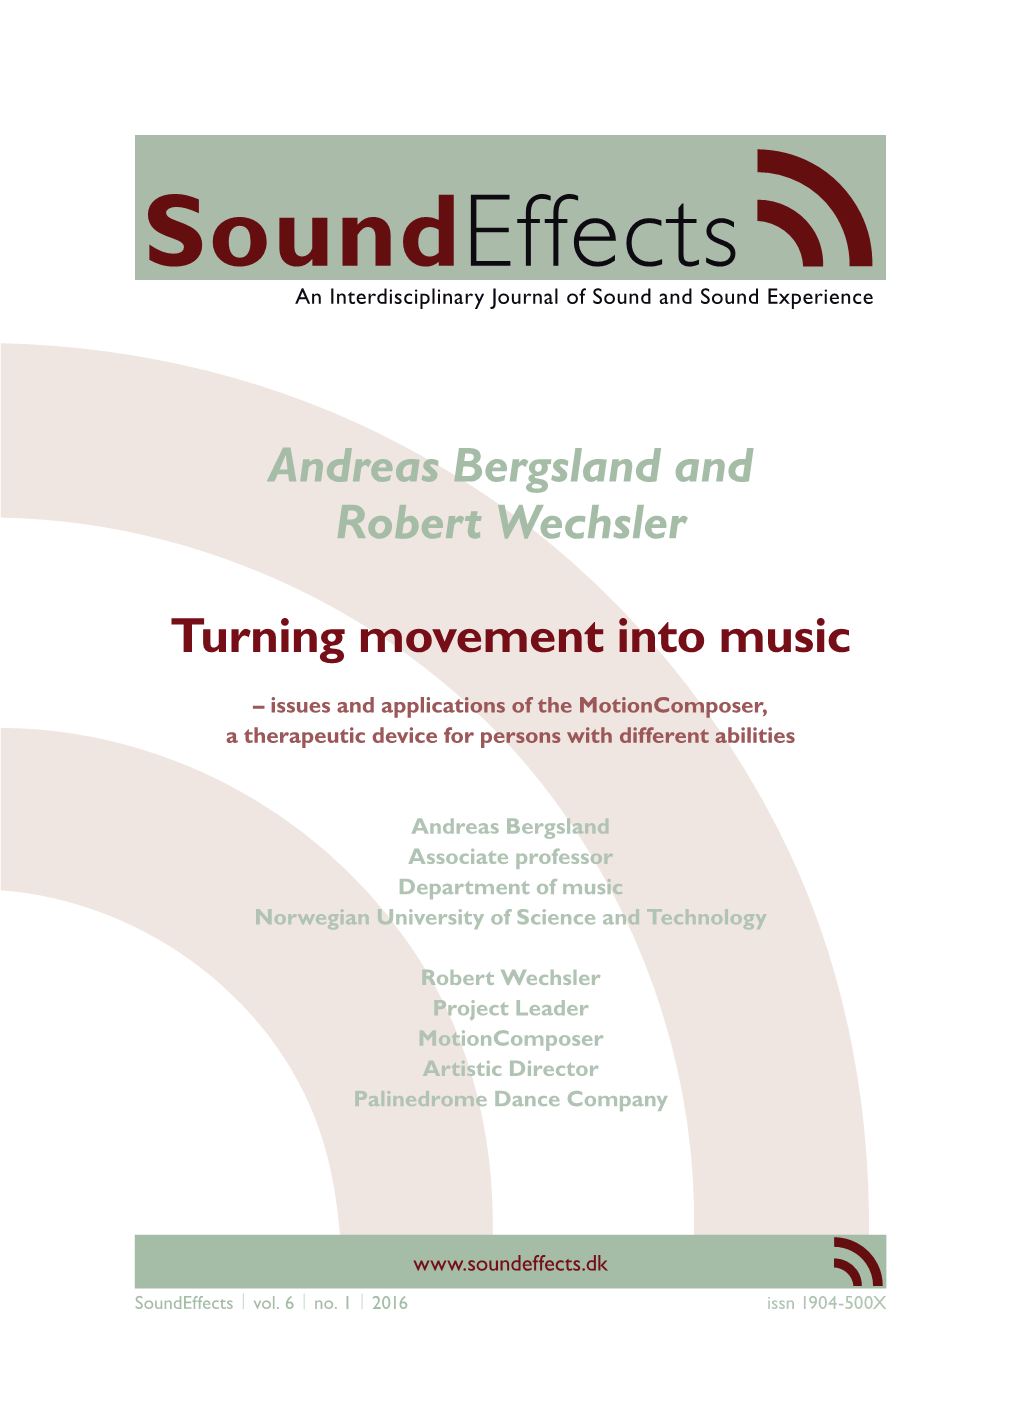 Andreas Bergsland and Robert Wechsler Turning Movement Into Music